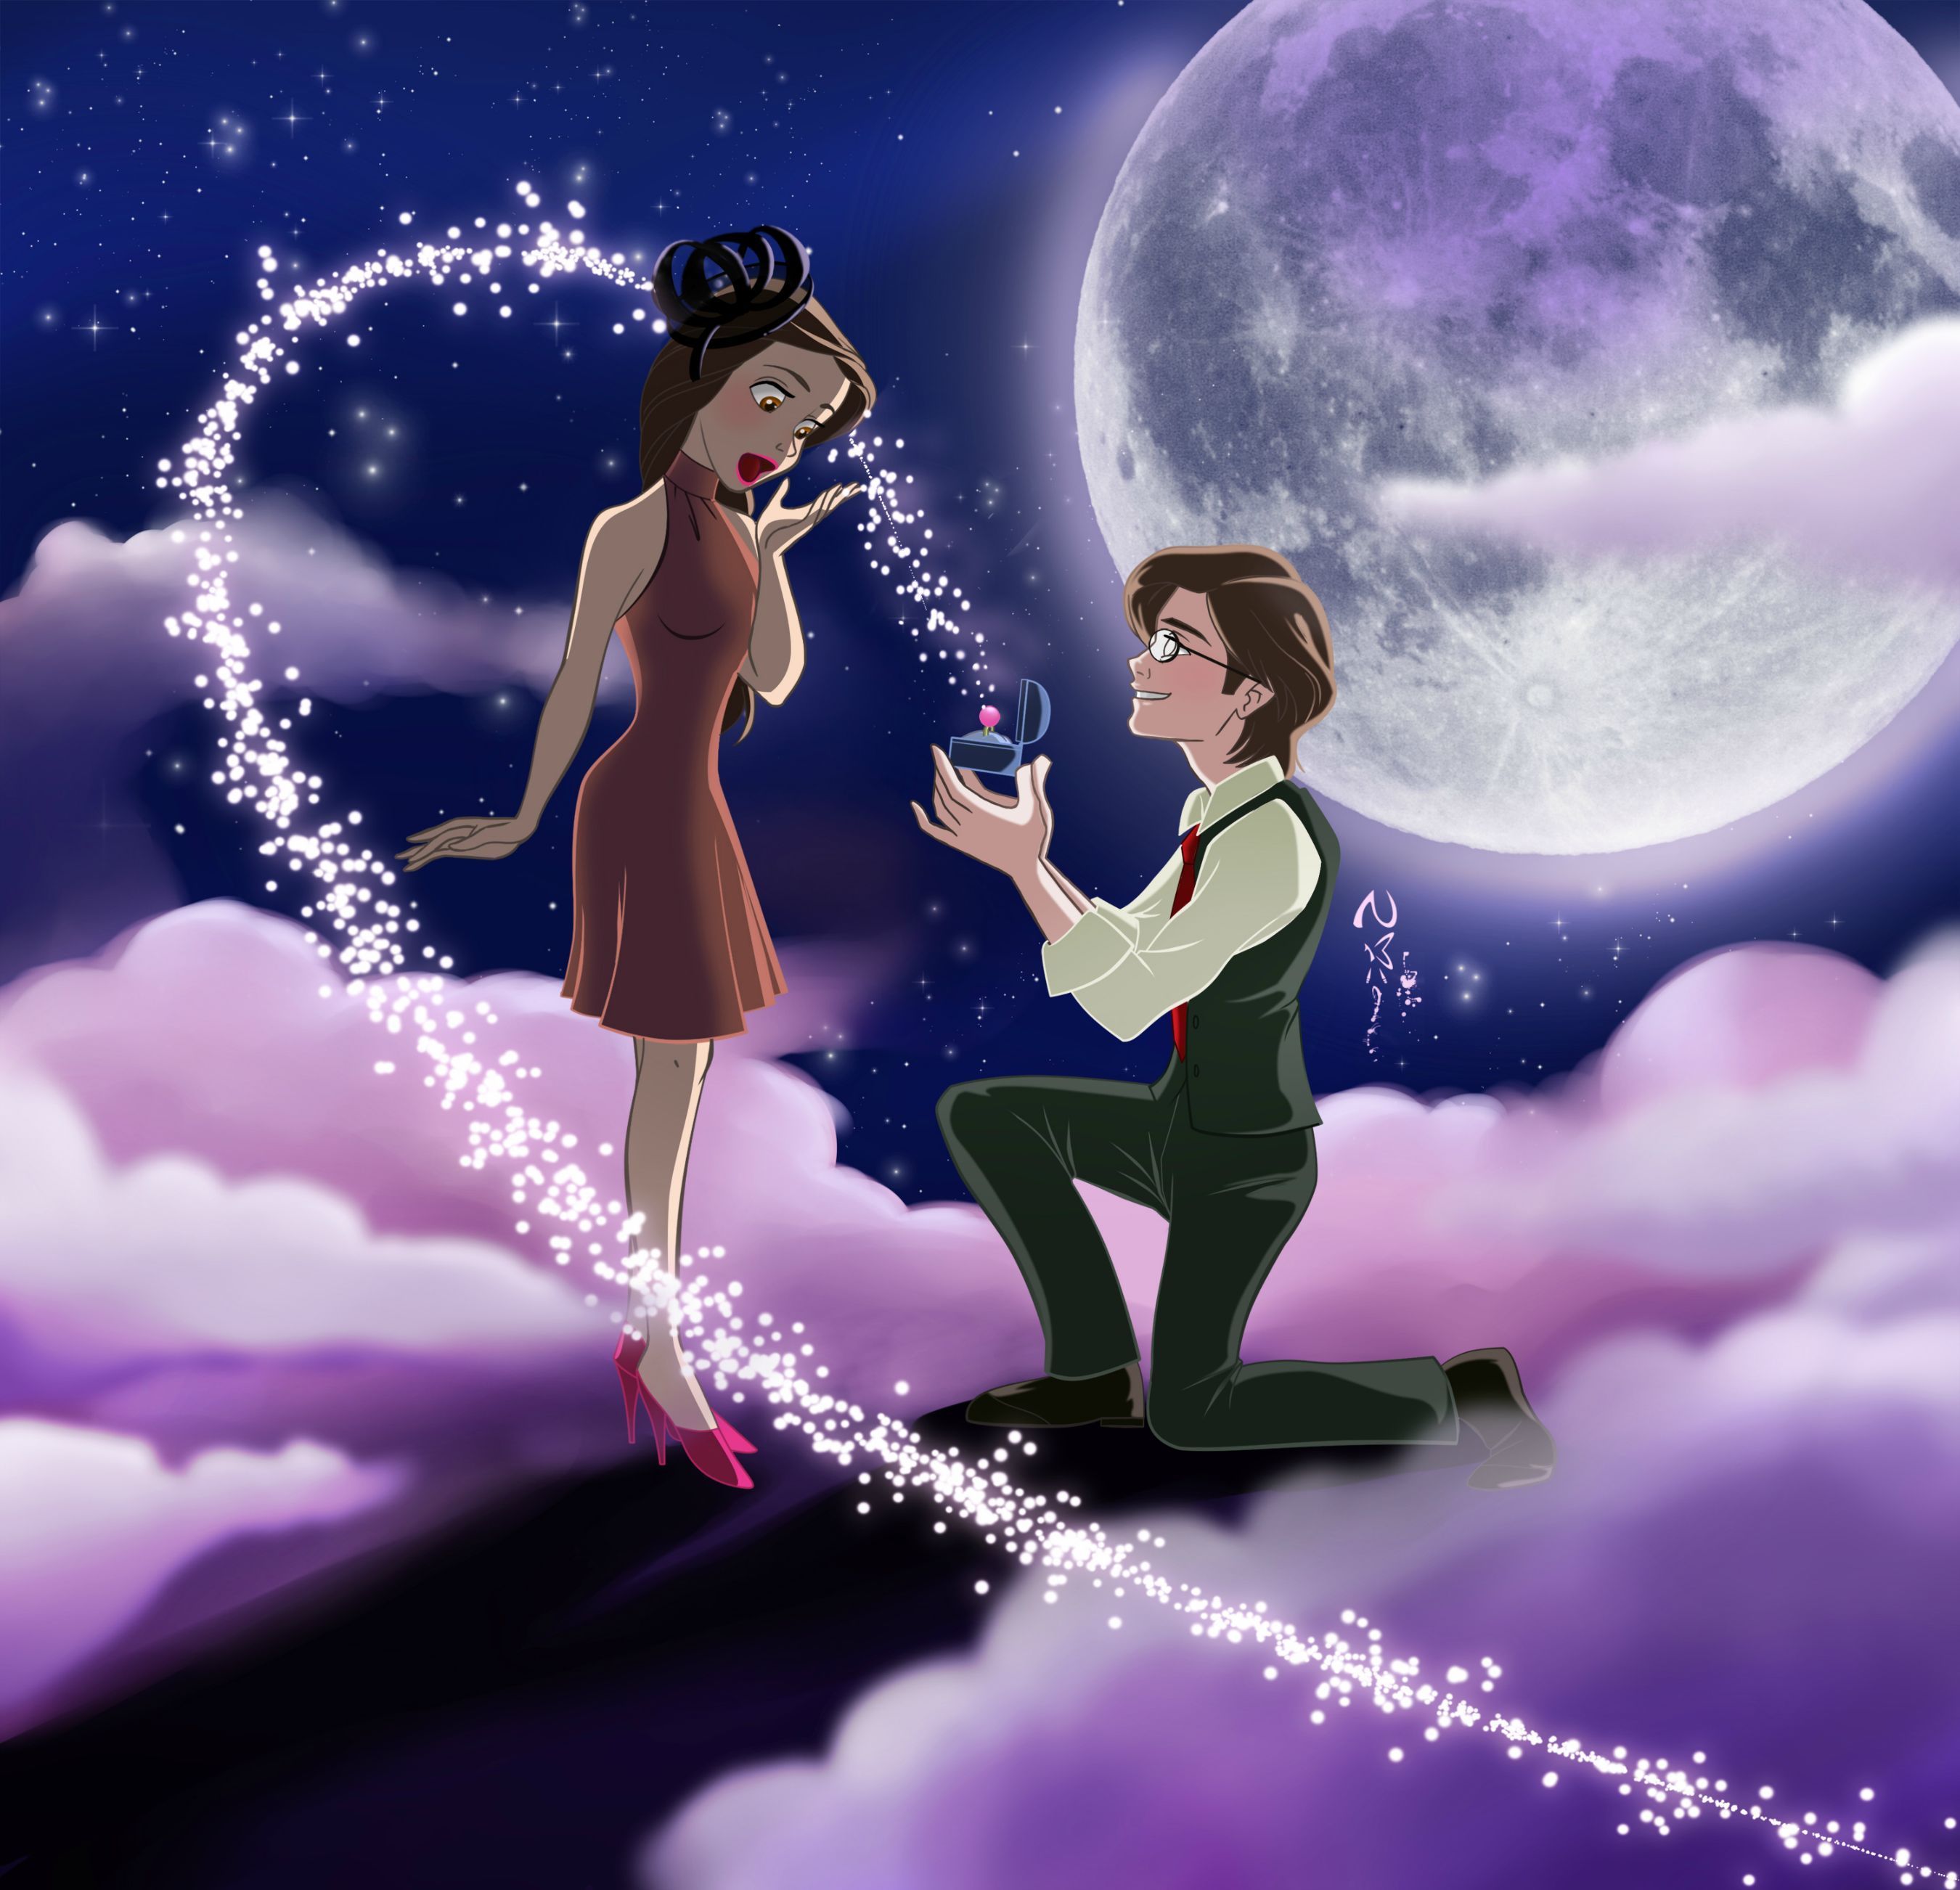 Will you marry me?. Propose day wallpaper, Propose day photo, Happy propose day